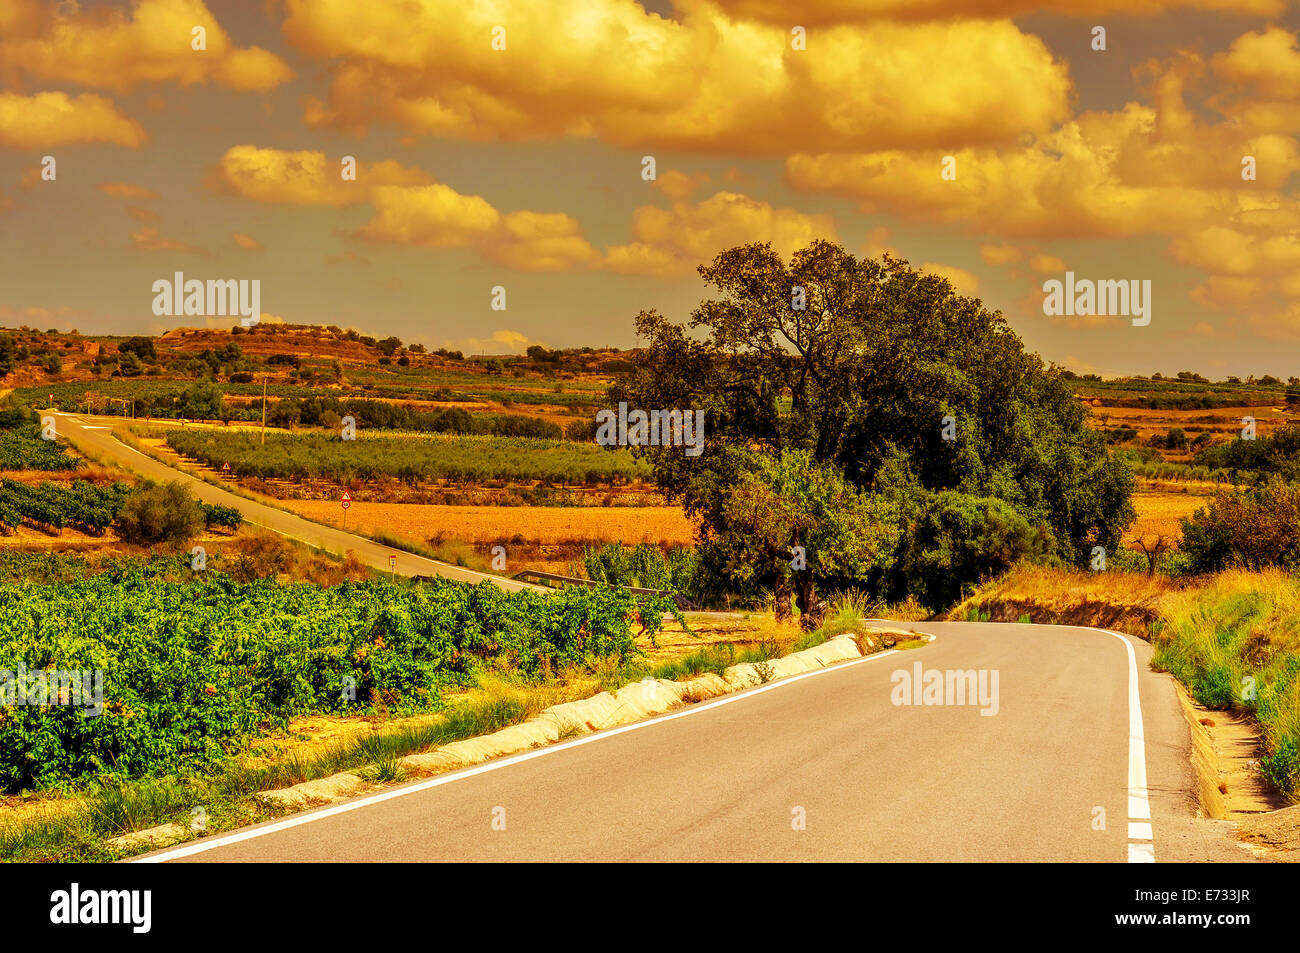 view of a quite landscape with vineyards and a secondary road in a mediterranean country at sunset Stock Photo